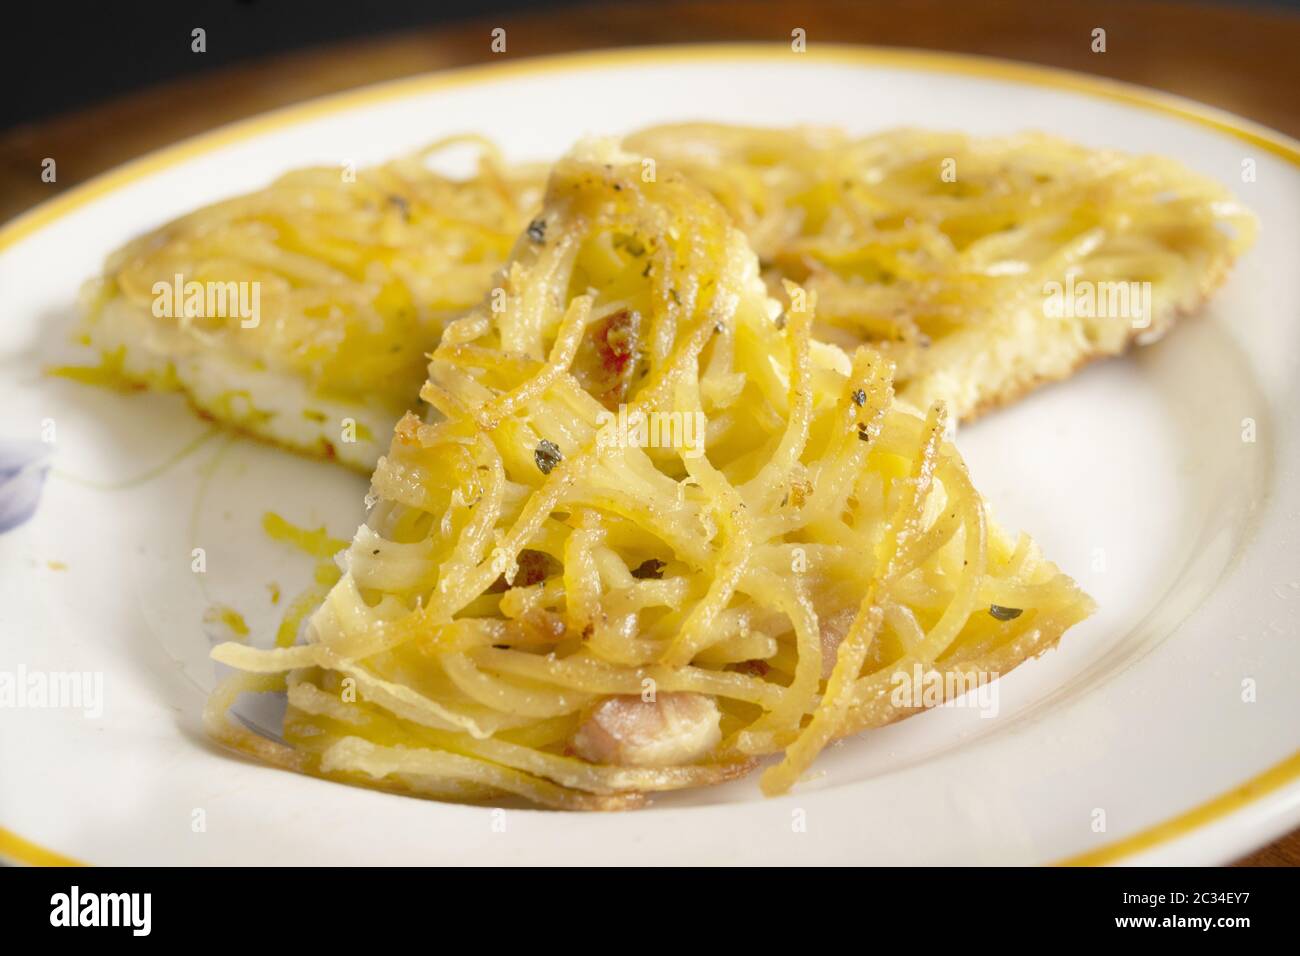 wedge of homemade omelette pasta in a dish Stock Photo